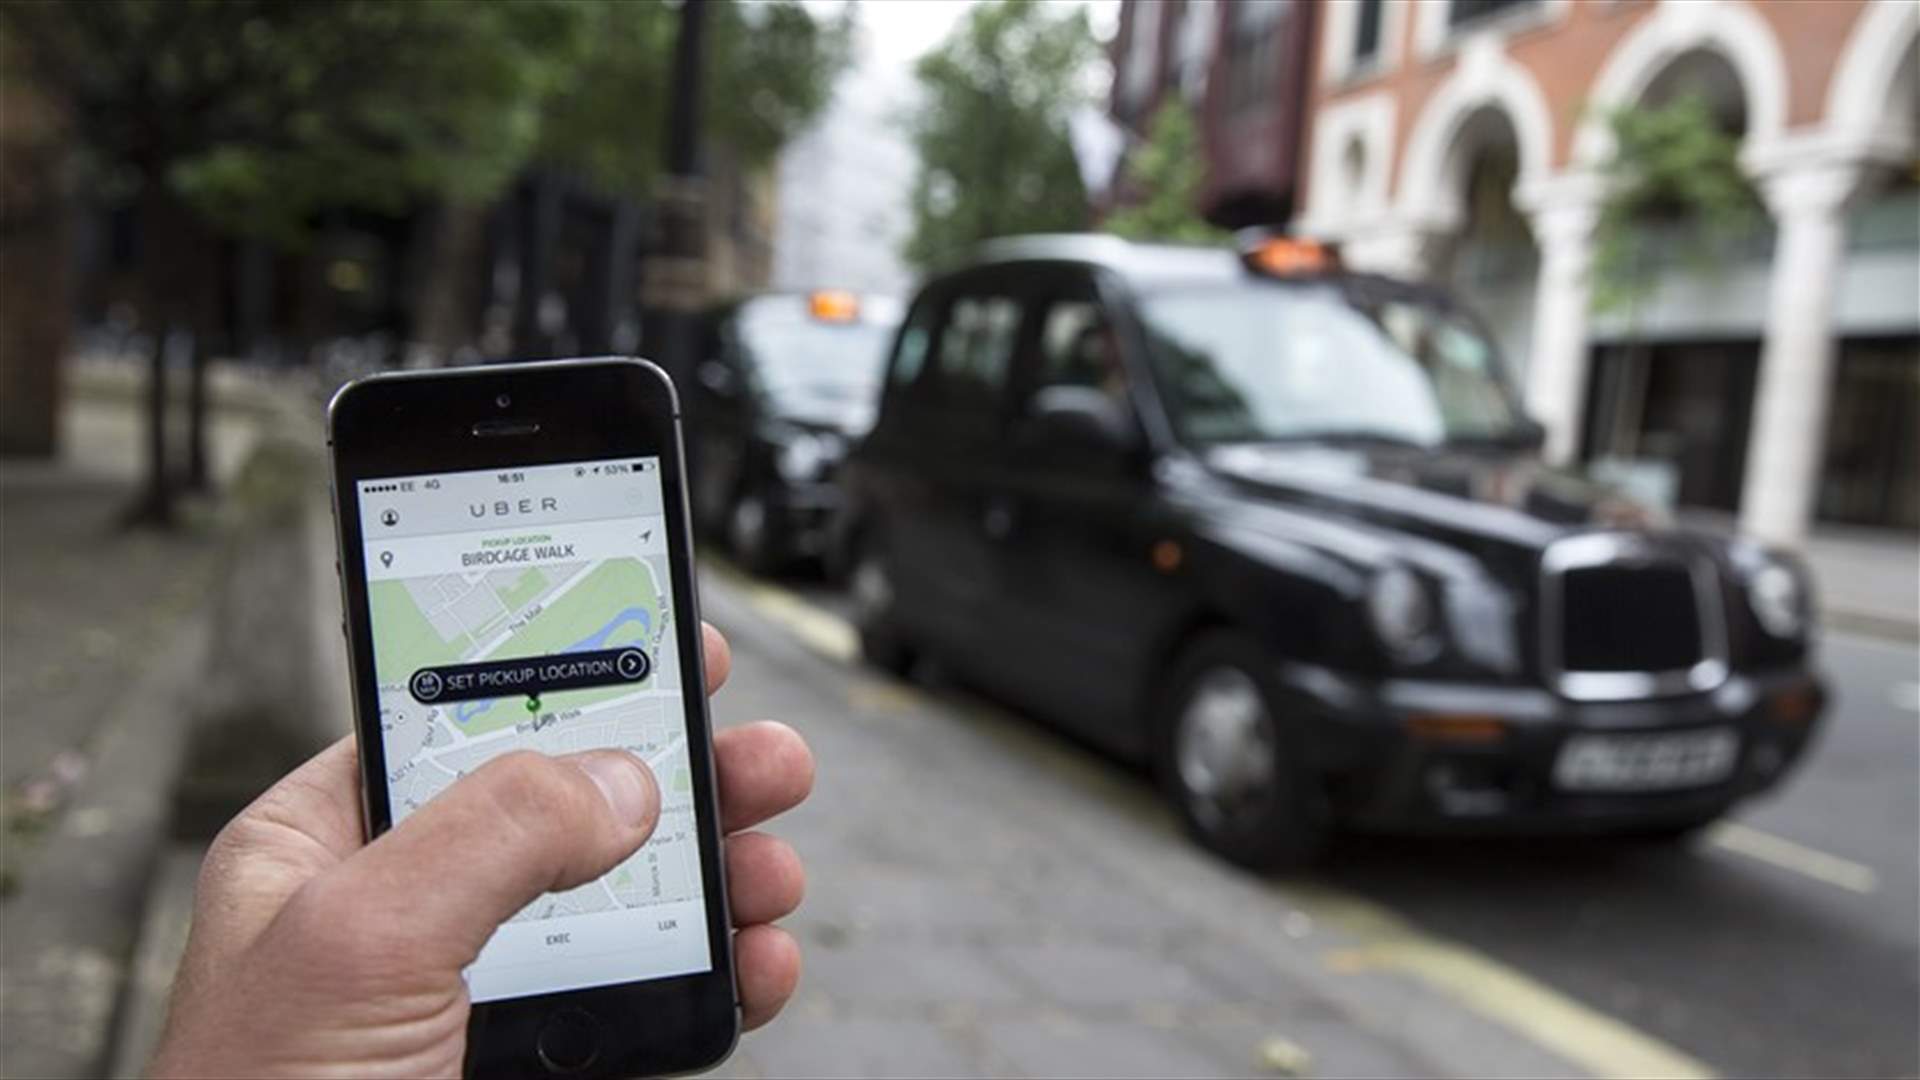 Uber To Stop Using Diesel Cars In London By End 2019